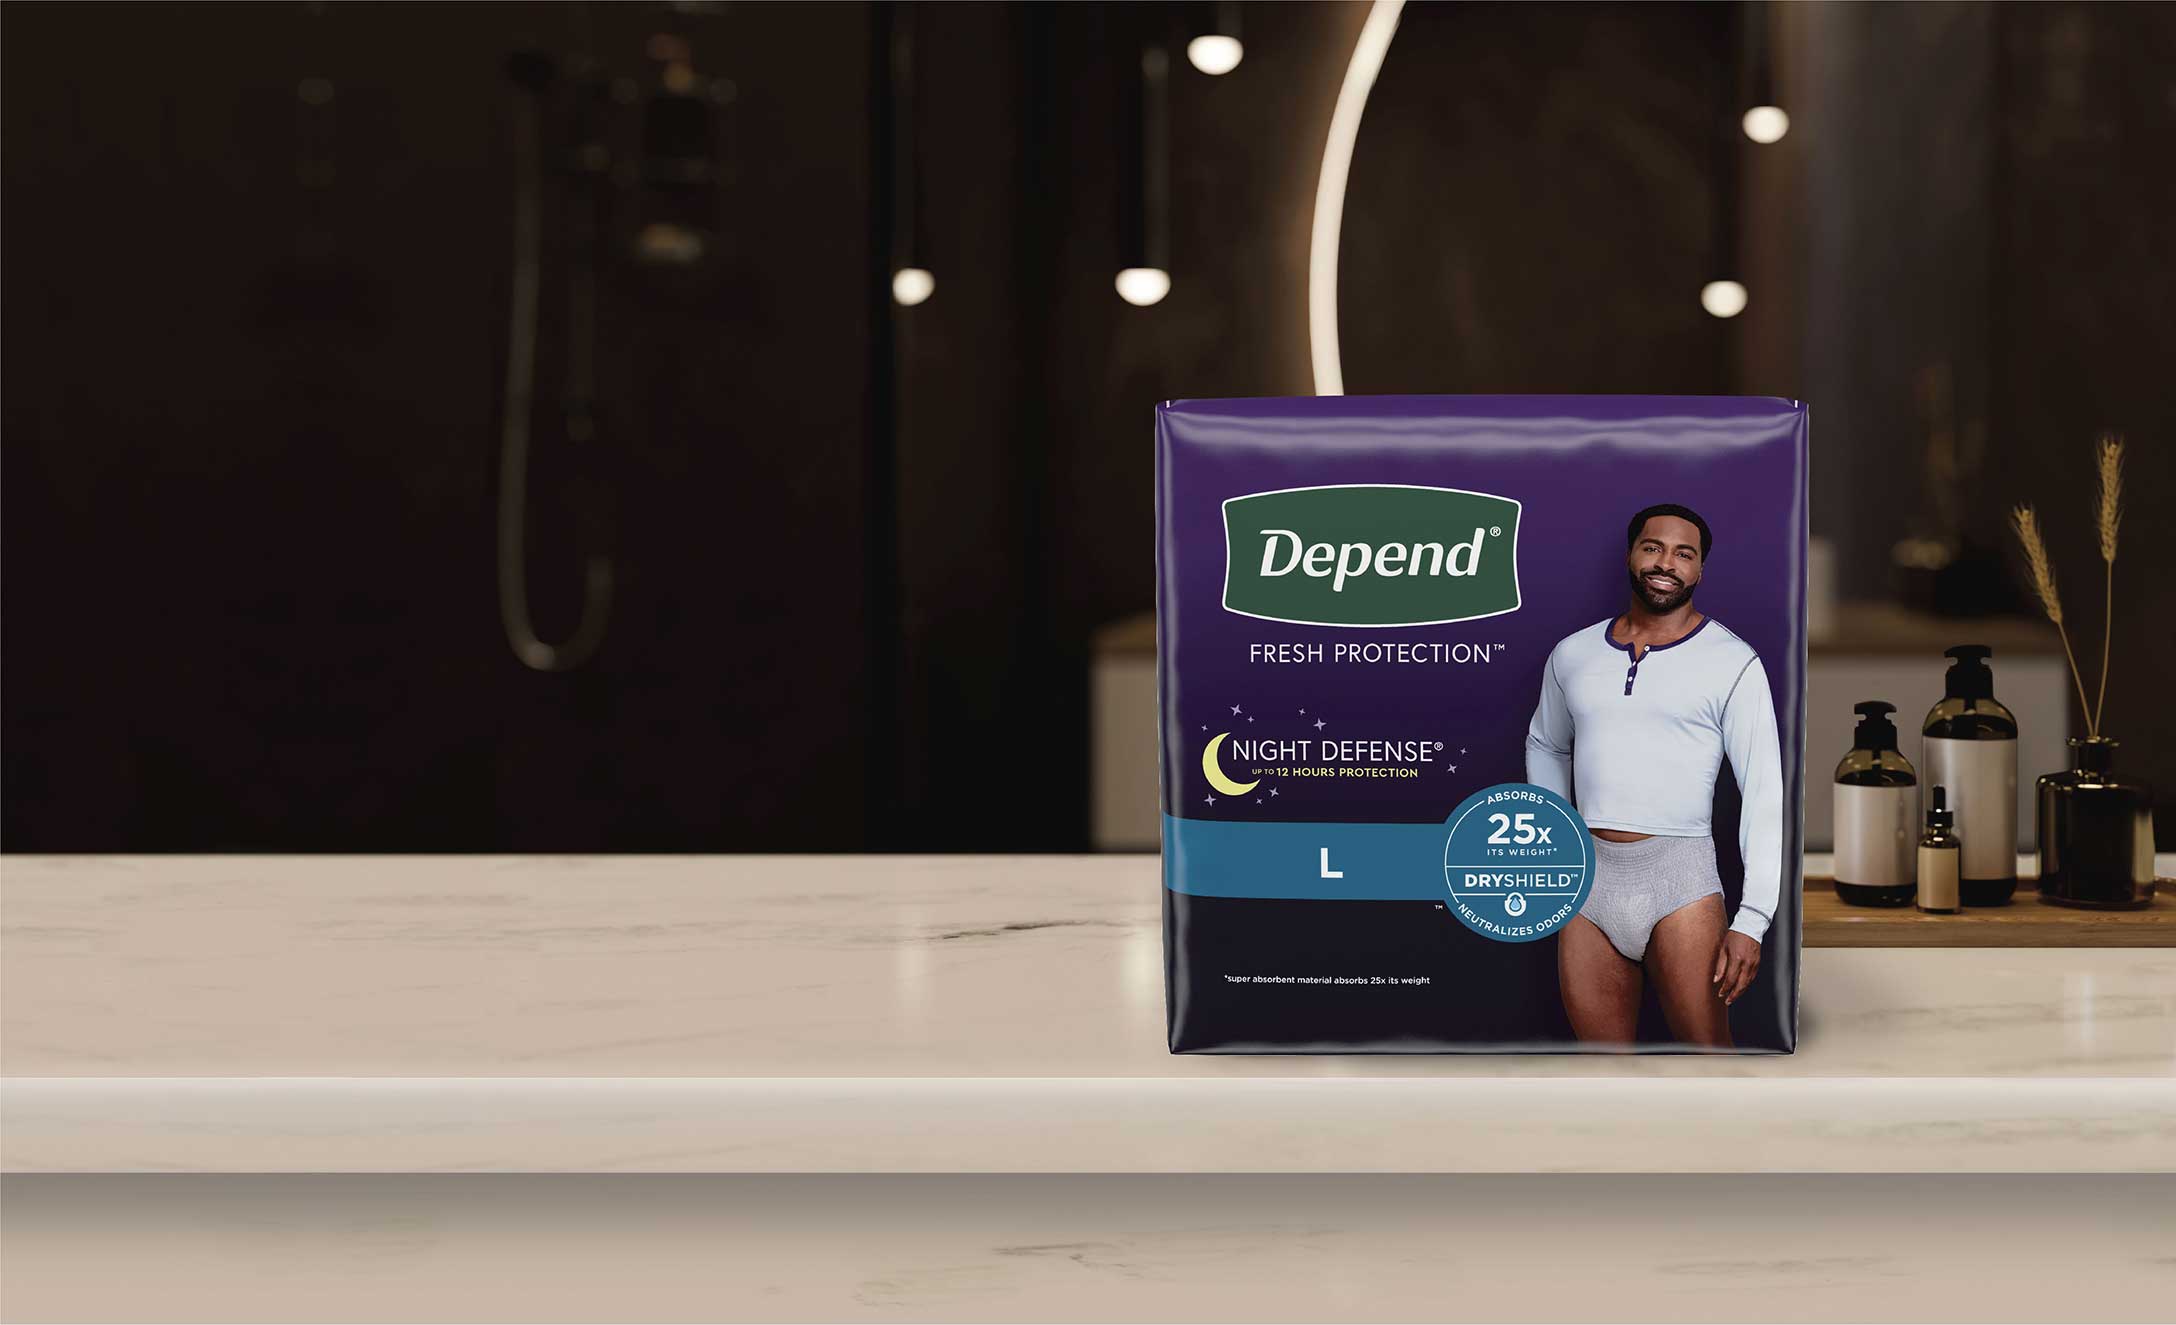 Adult Incontinence Products, Advice & Support | Depend® US